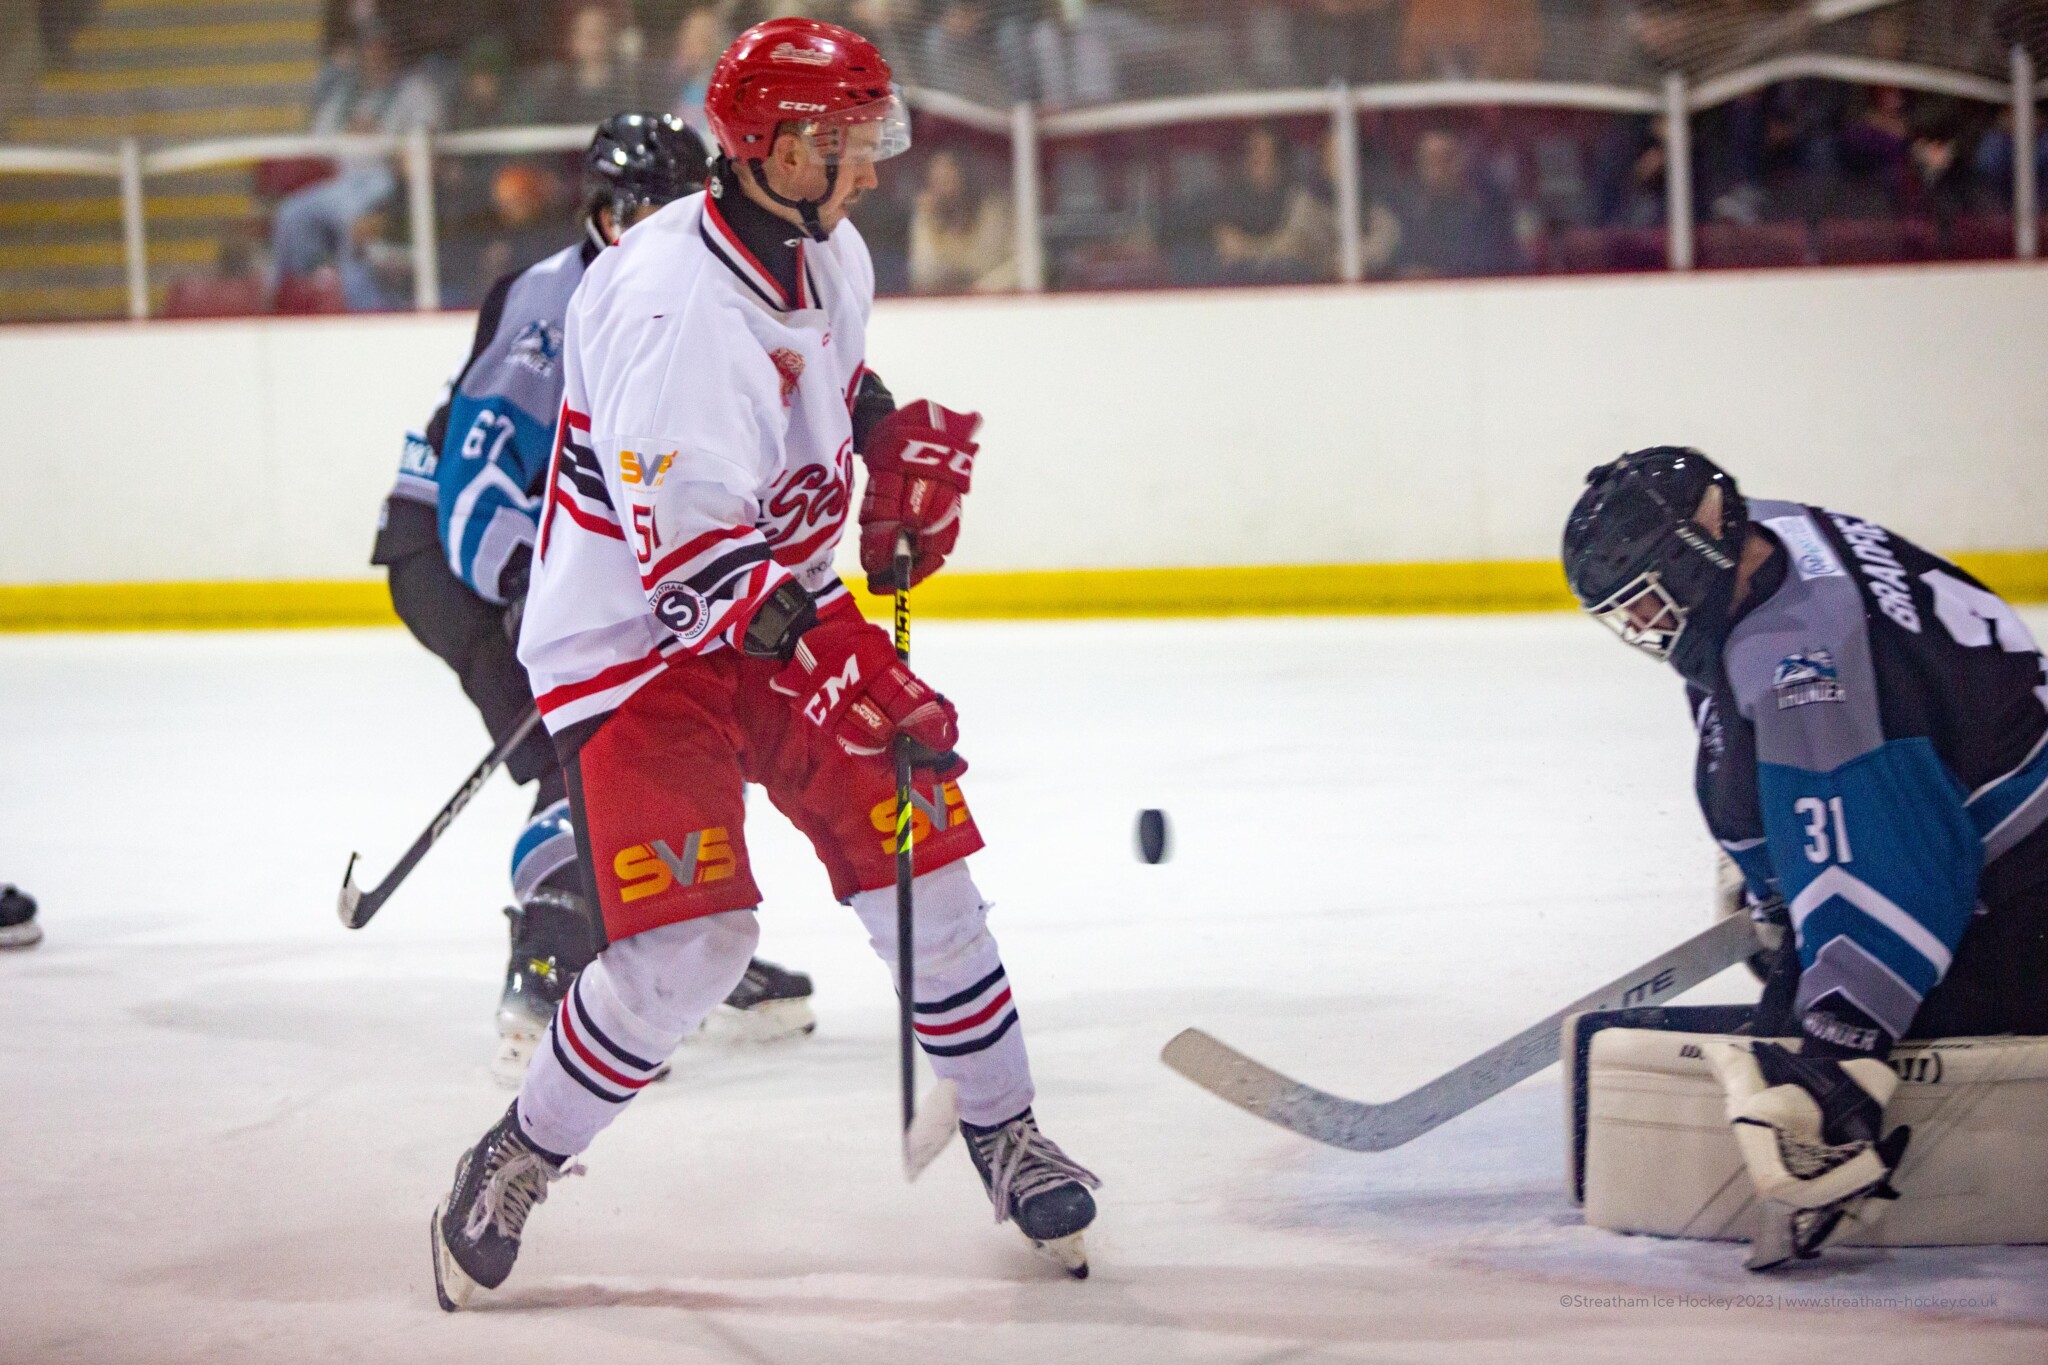 Ice-hockey: Streatham take on Solent Devils in NIHL 1 South play-off semi-final - South London News